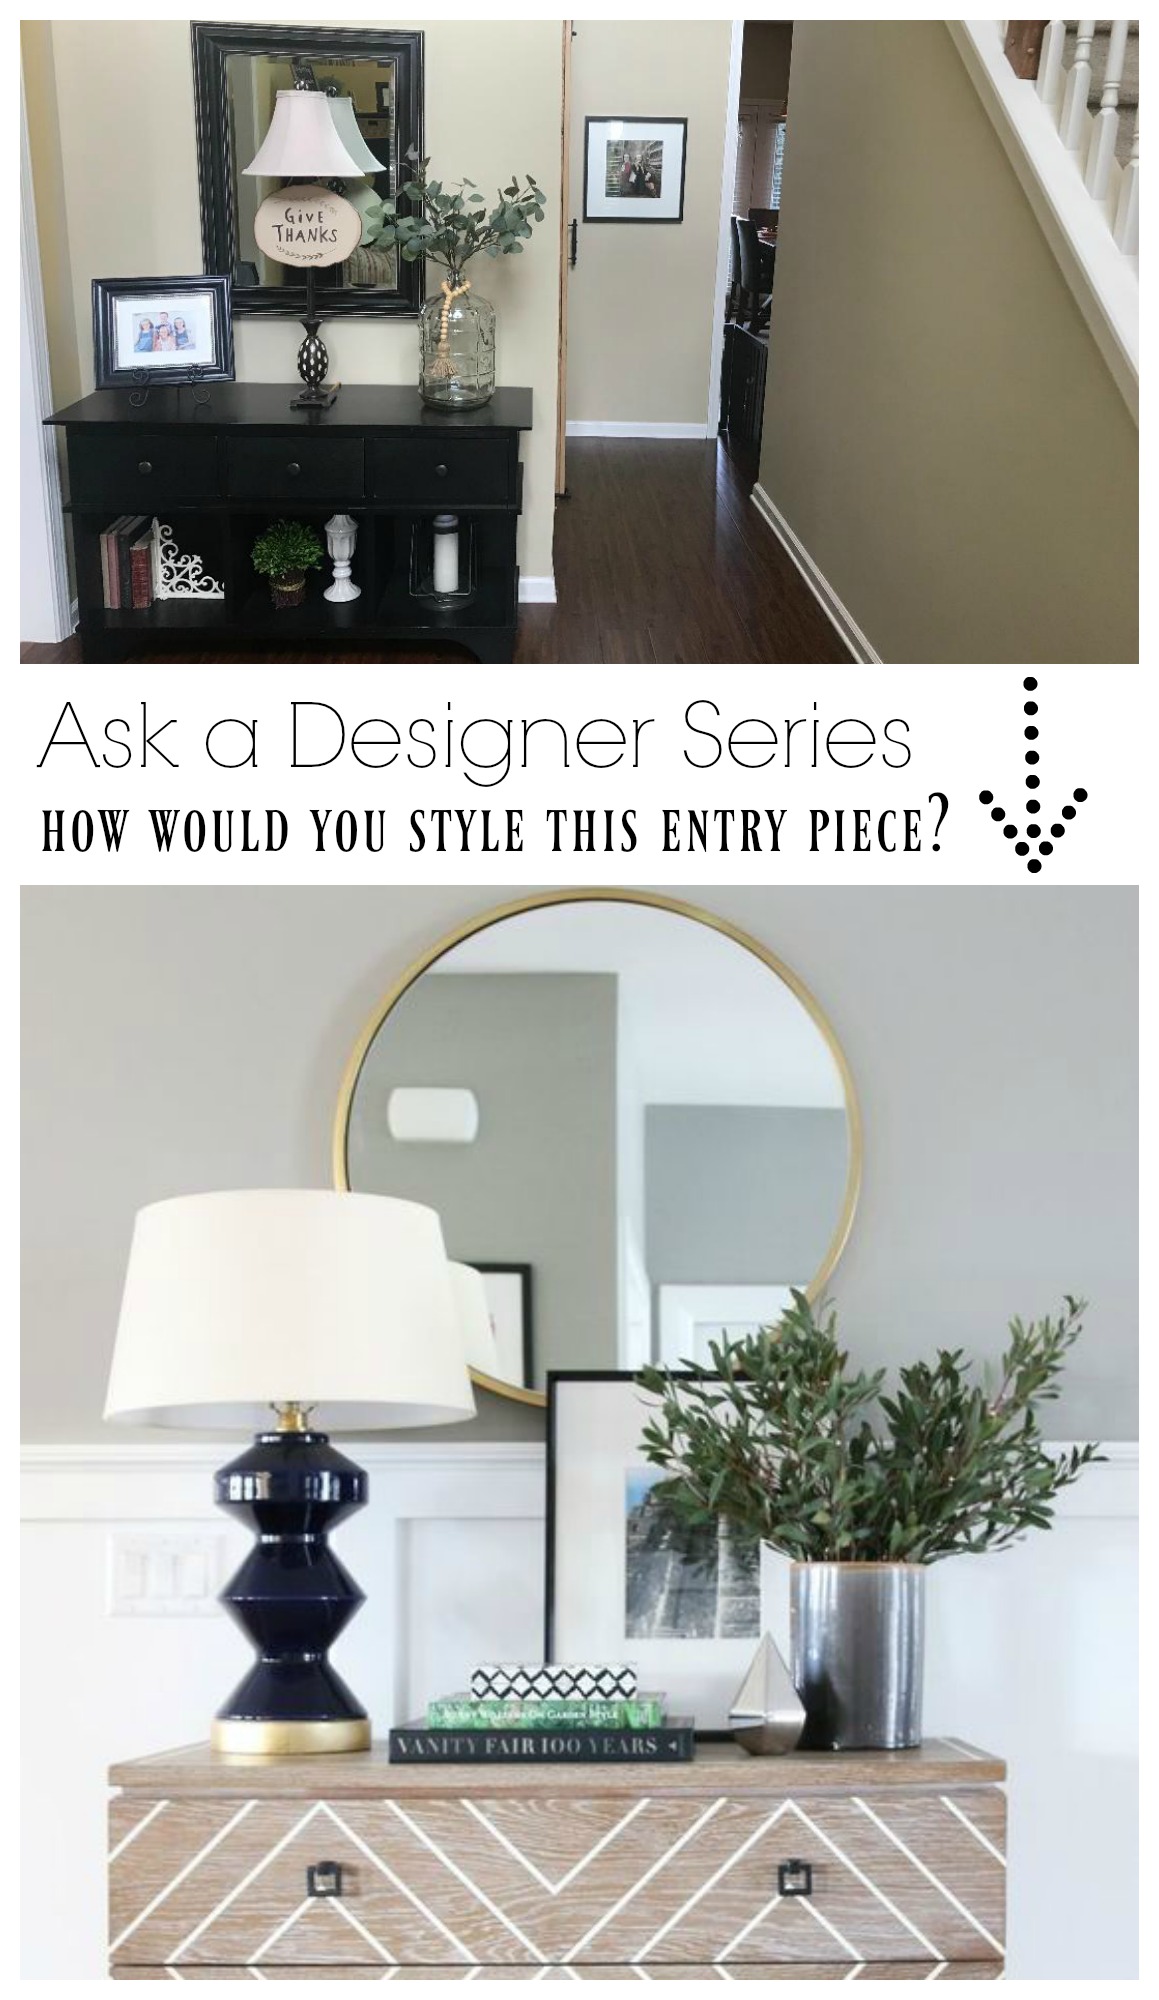 Ask a Designer Series how would you style this Entry Piece?